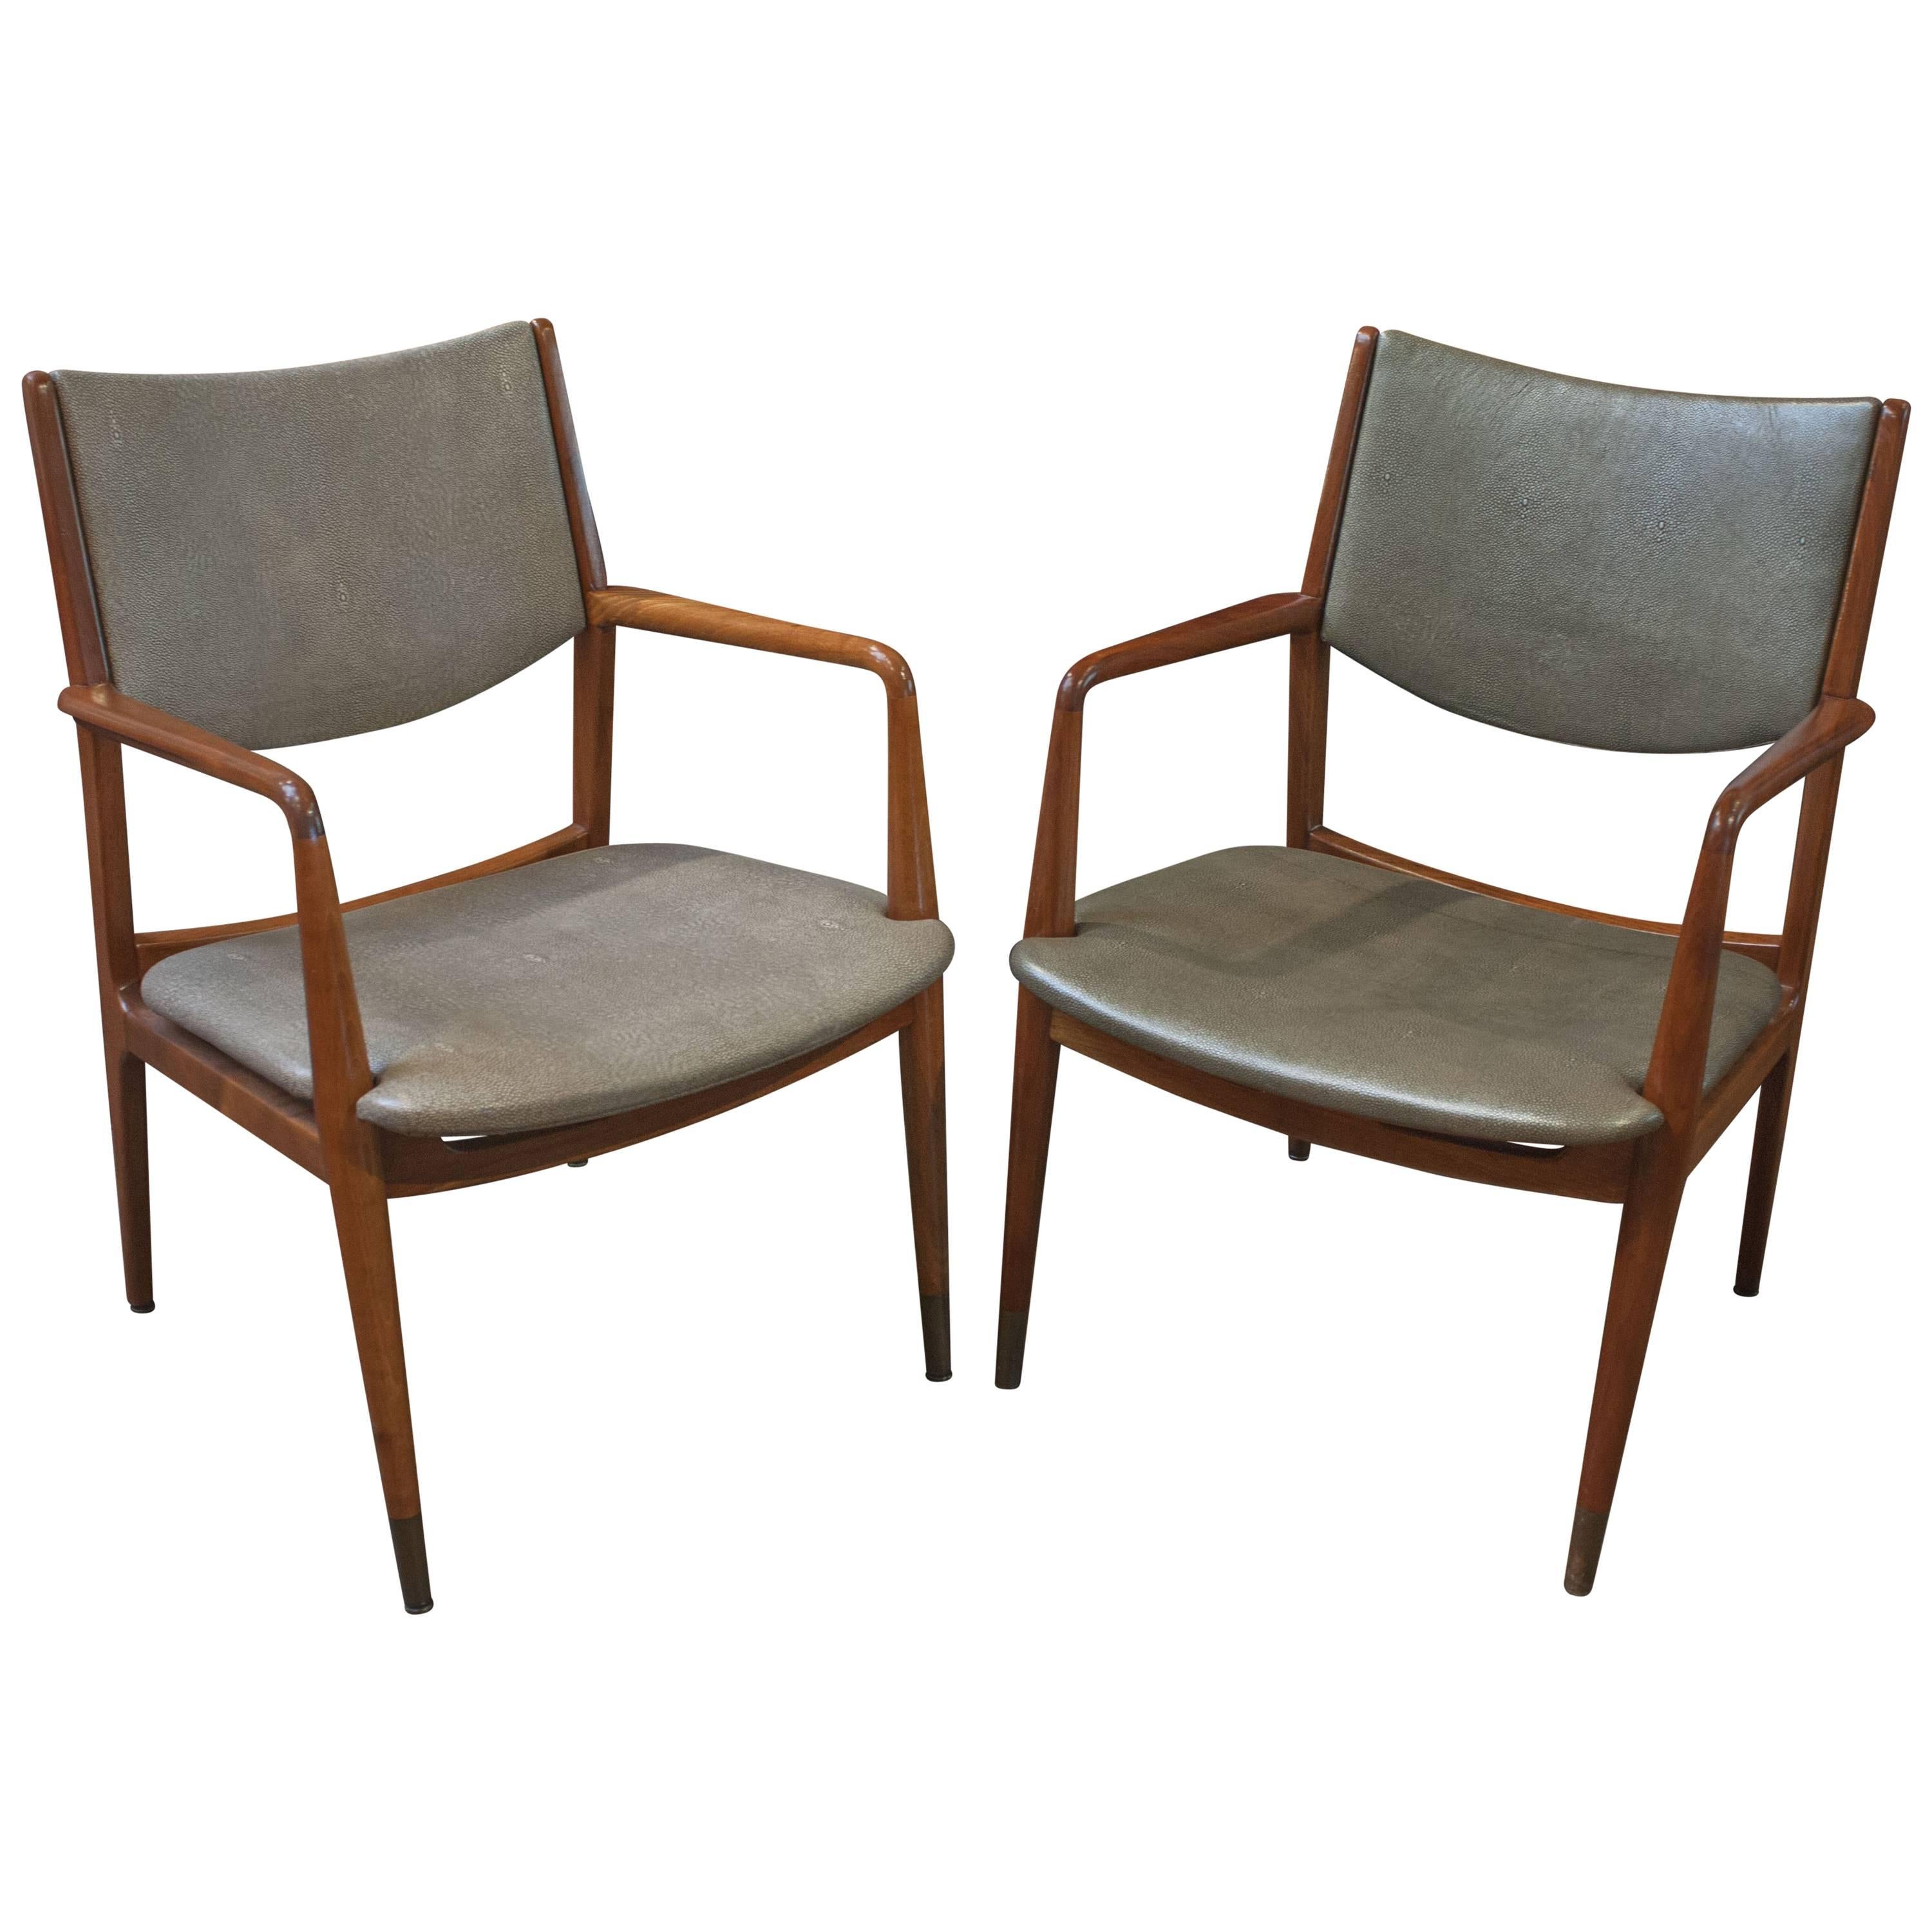 Pair Walnut and Shagreen Leather Armchairs by George Reinoehl for Stow & Davis